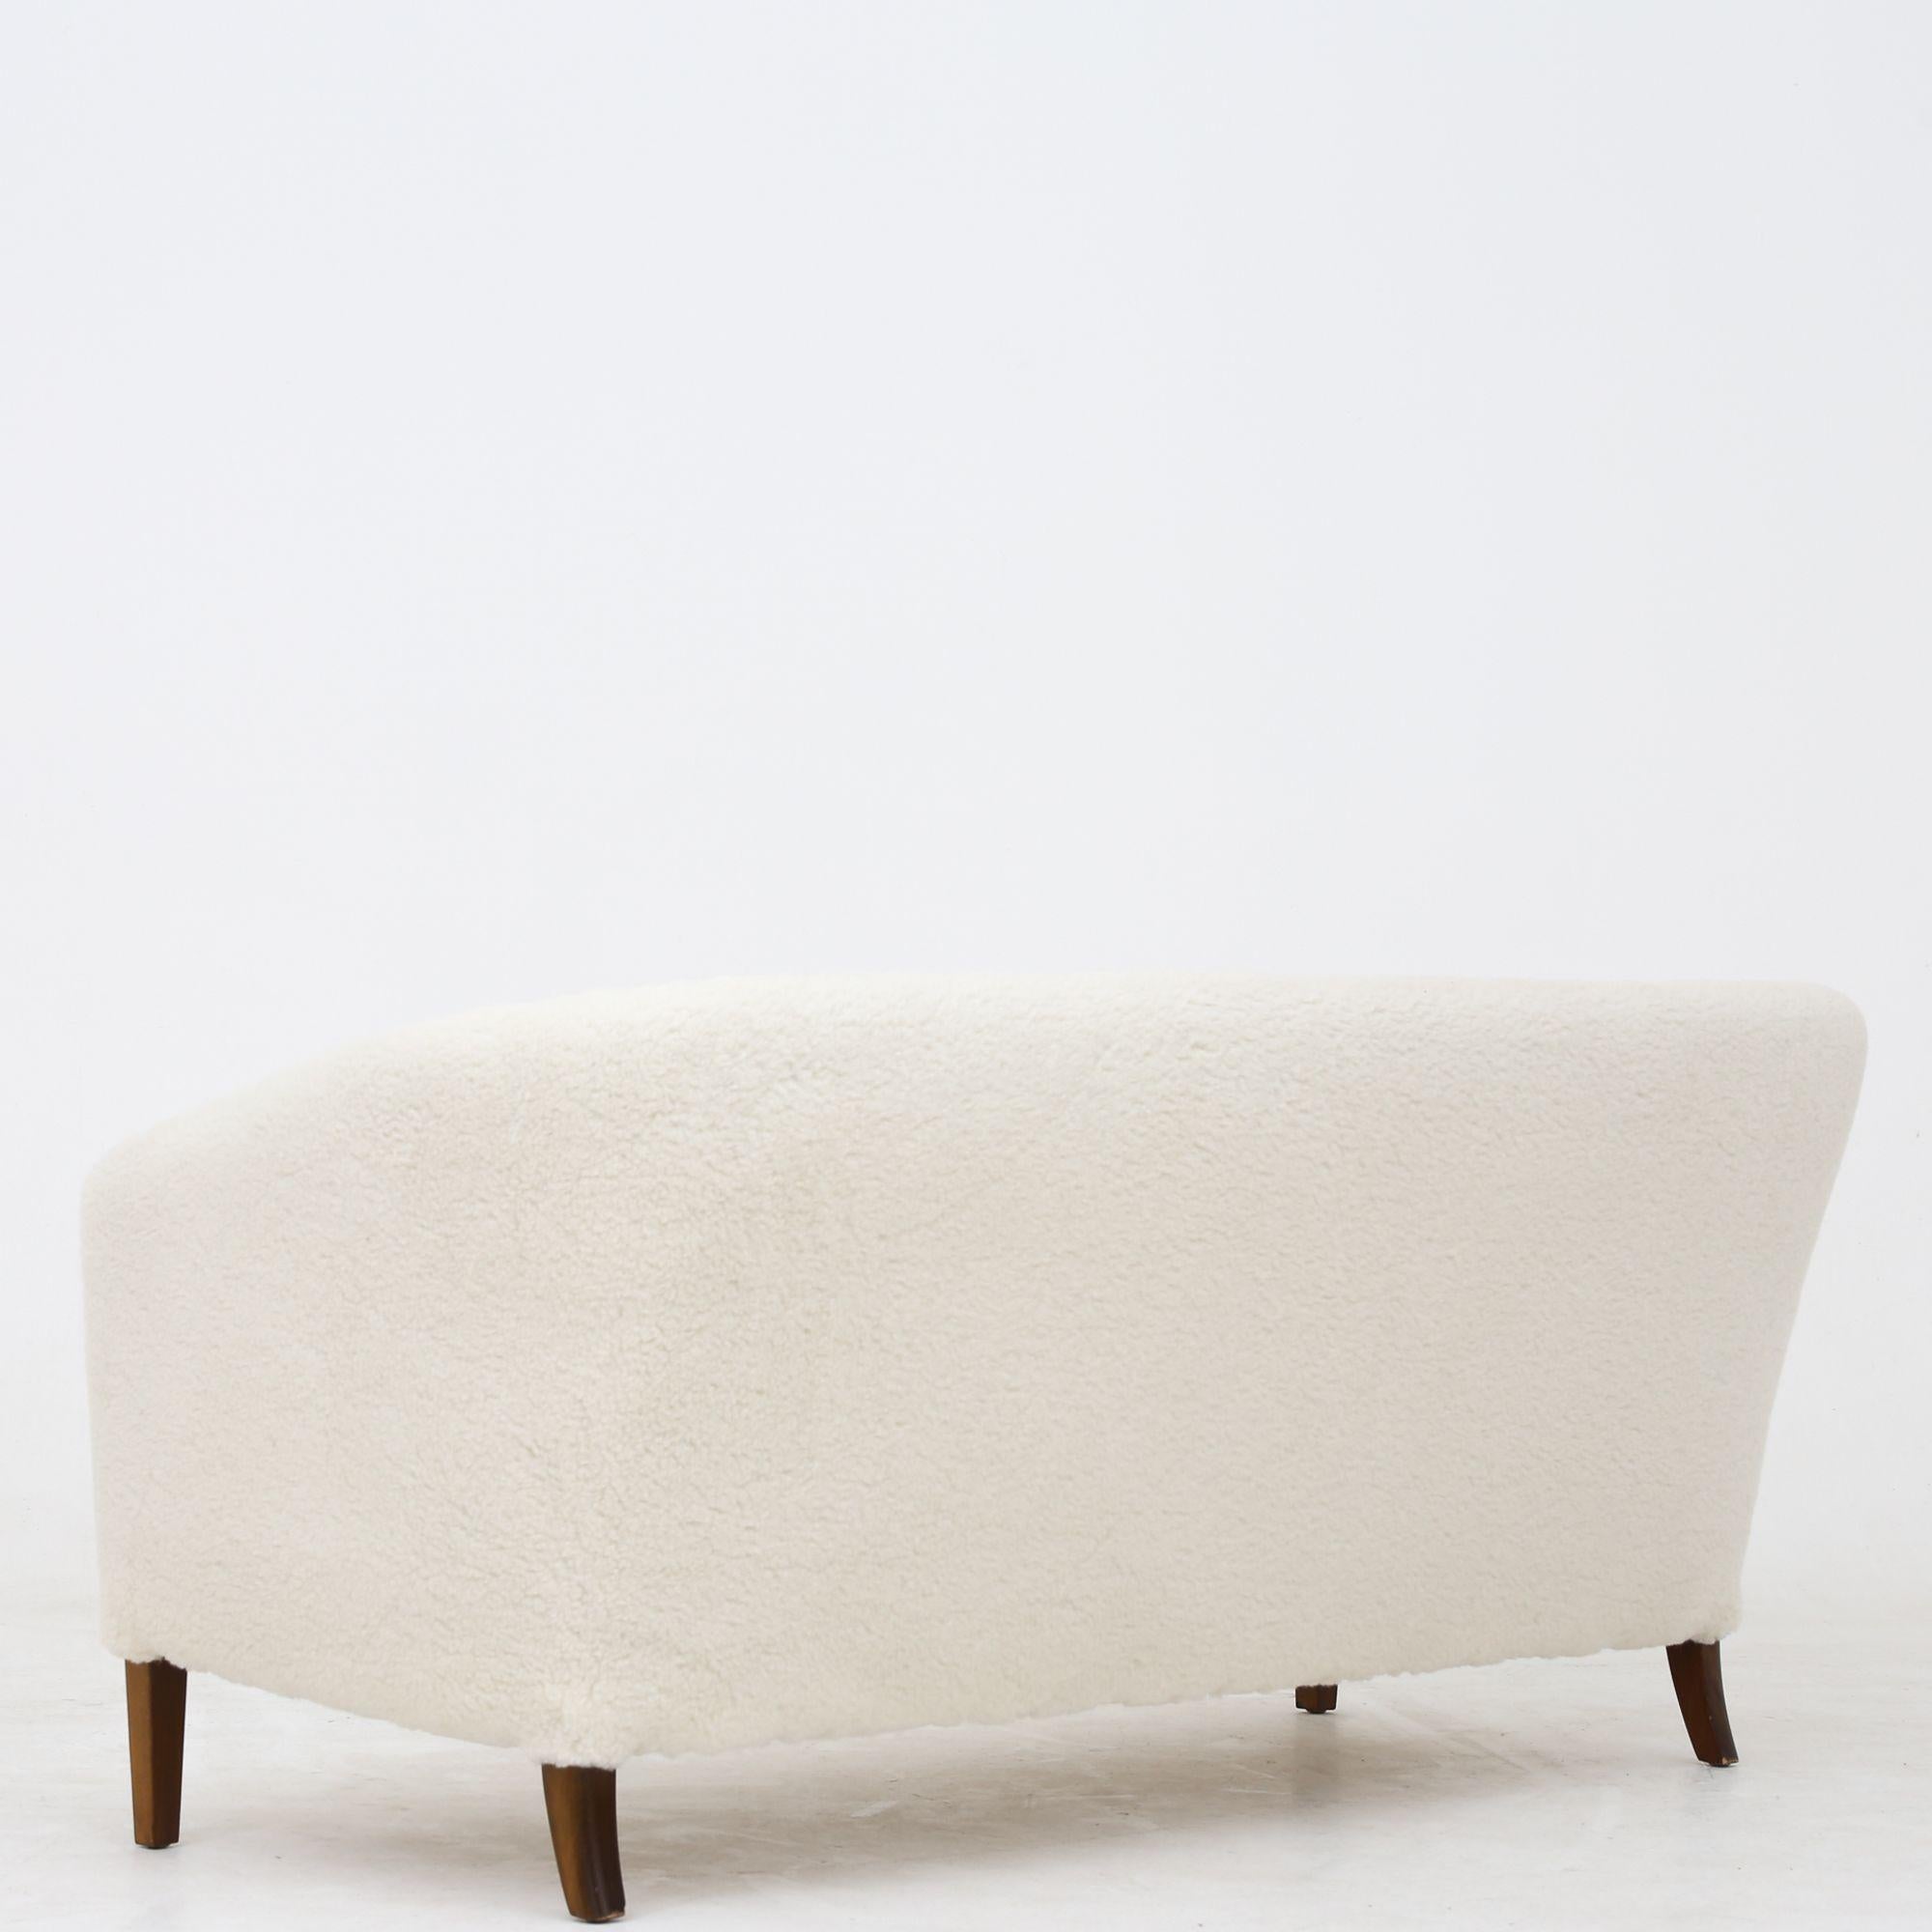 3-seater sofa in lambswool in new lambswool and buttons in natural leather. Ludvig Pontoppidan.